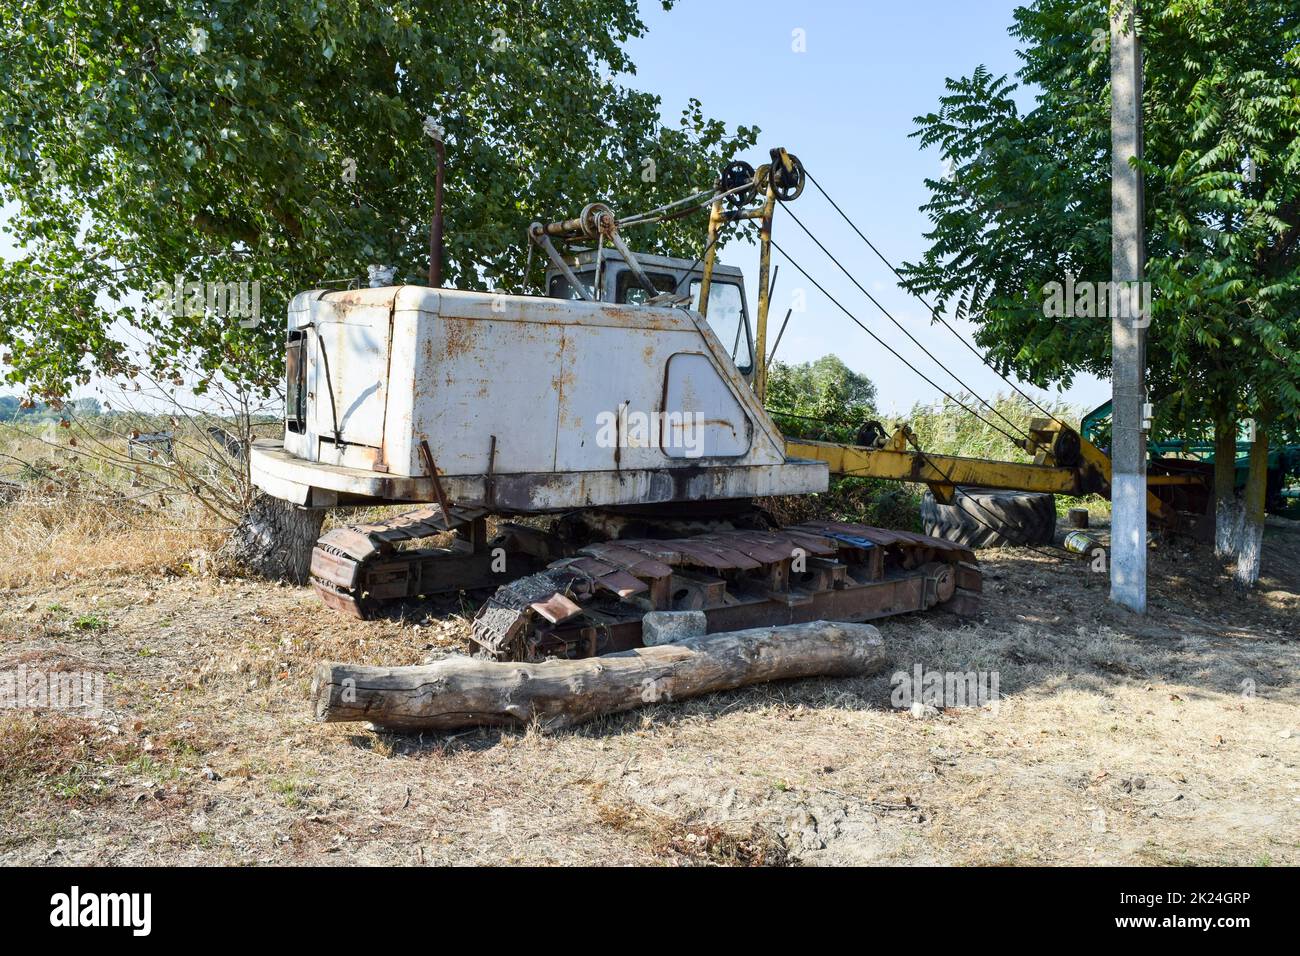 Old quarry near the dragline. Old equipment for digging the soil in canals and quarries. Stock Photo